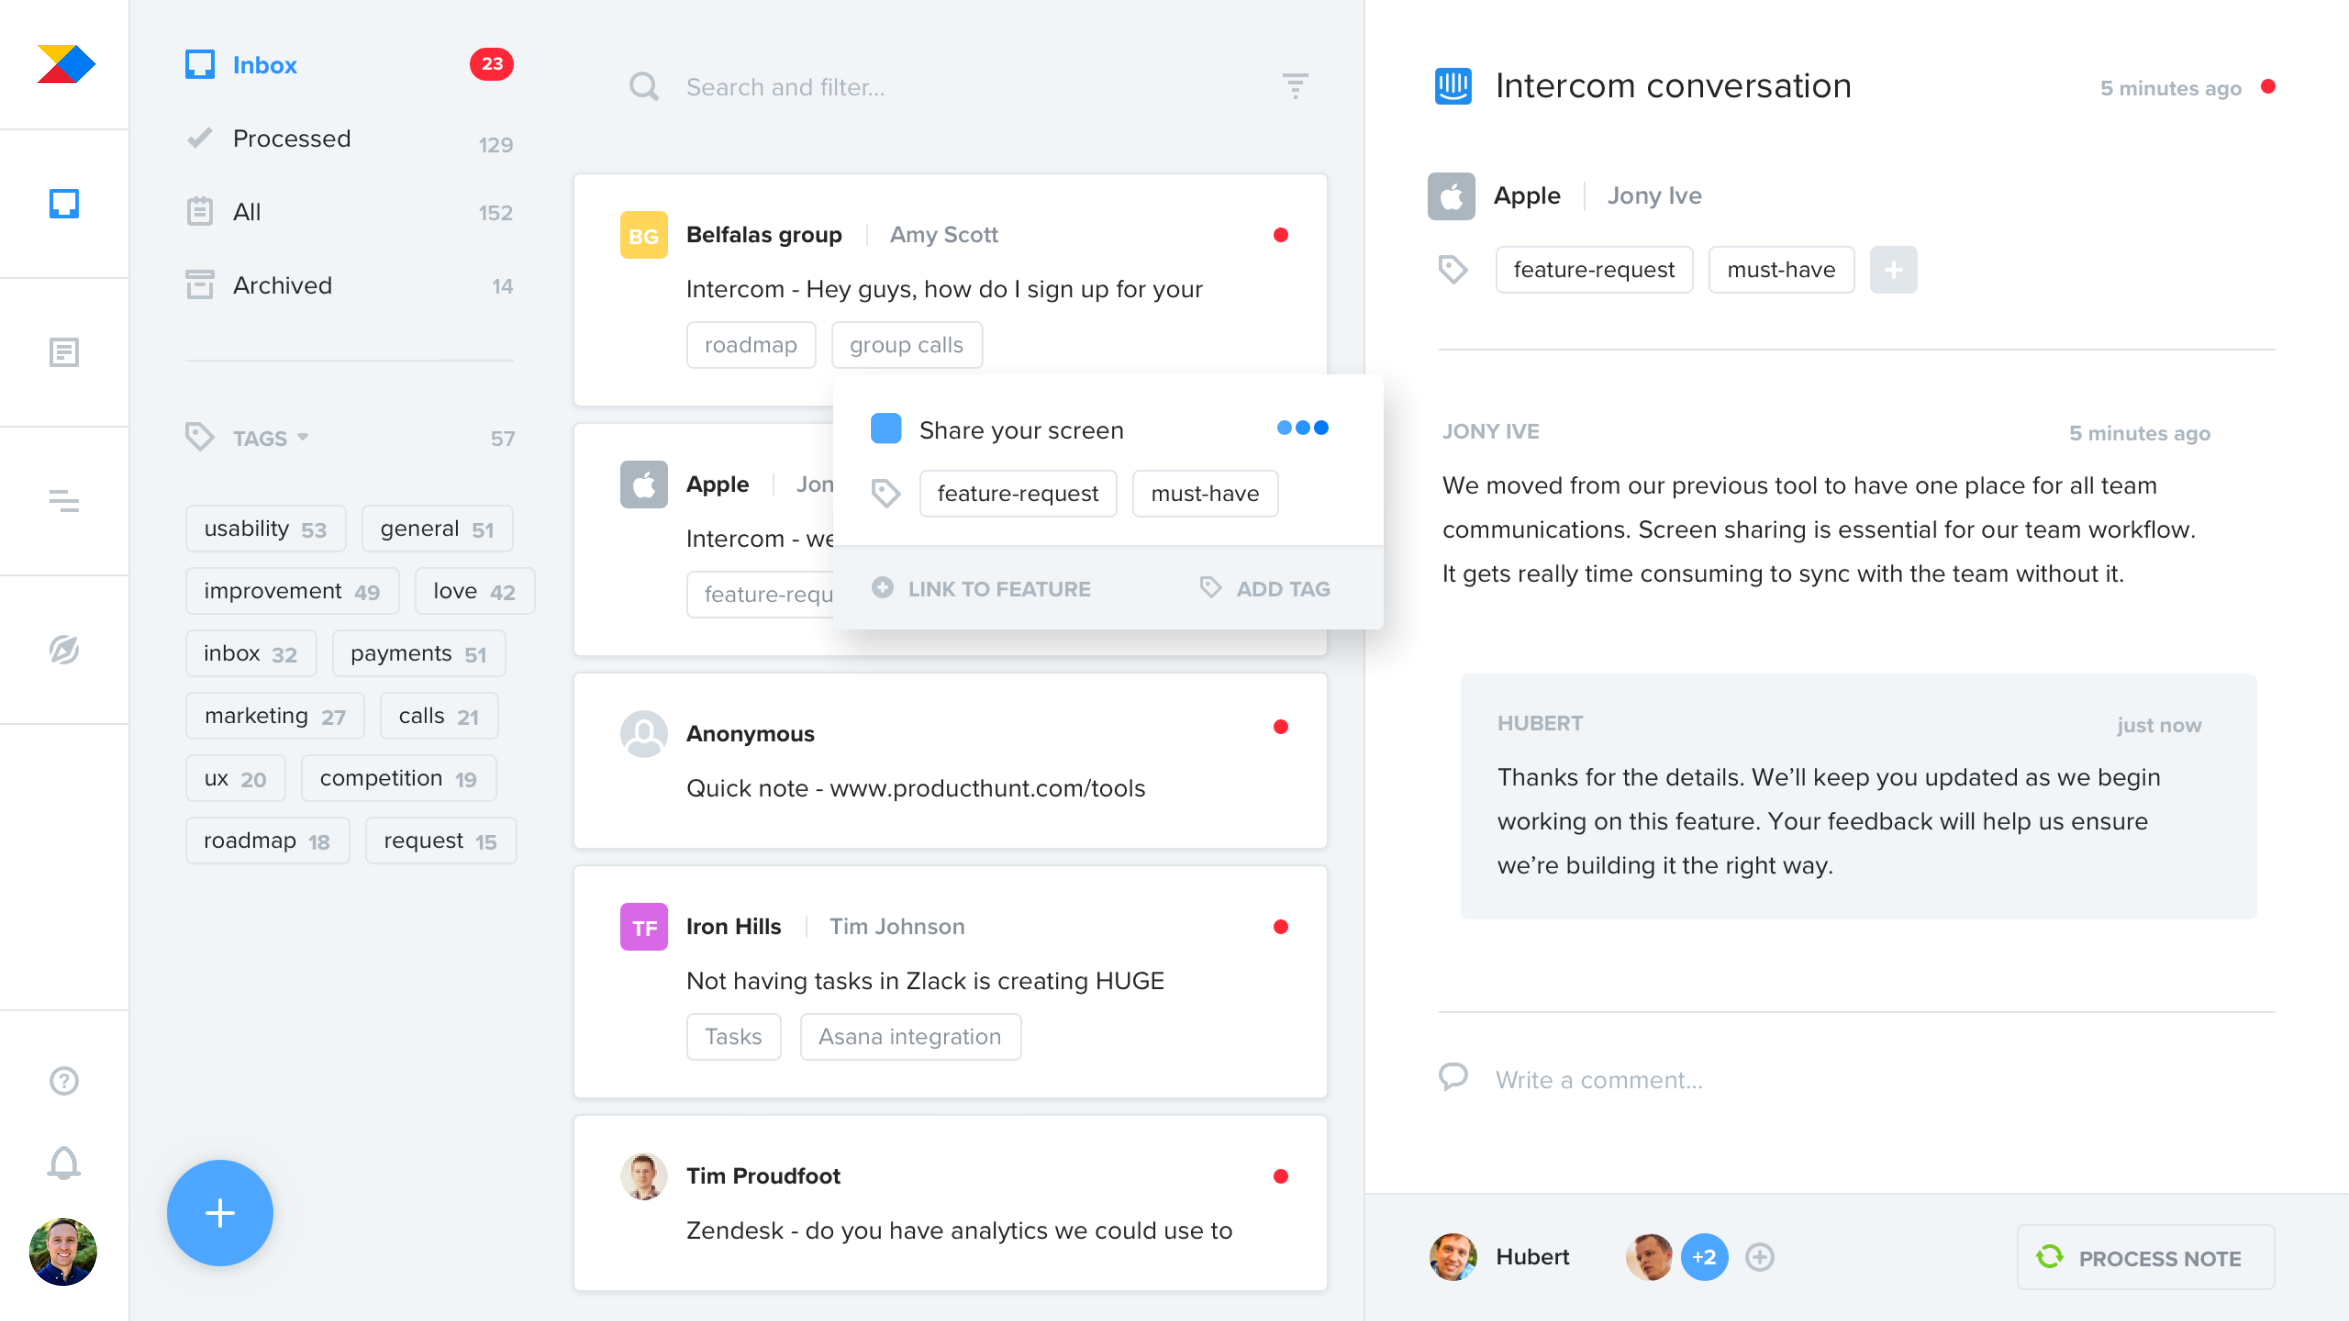 Productboard Software - Consolidate product ideas, requests, and feedback from a variety of sources and identify trends around what customers really need